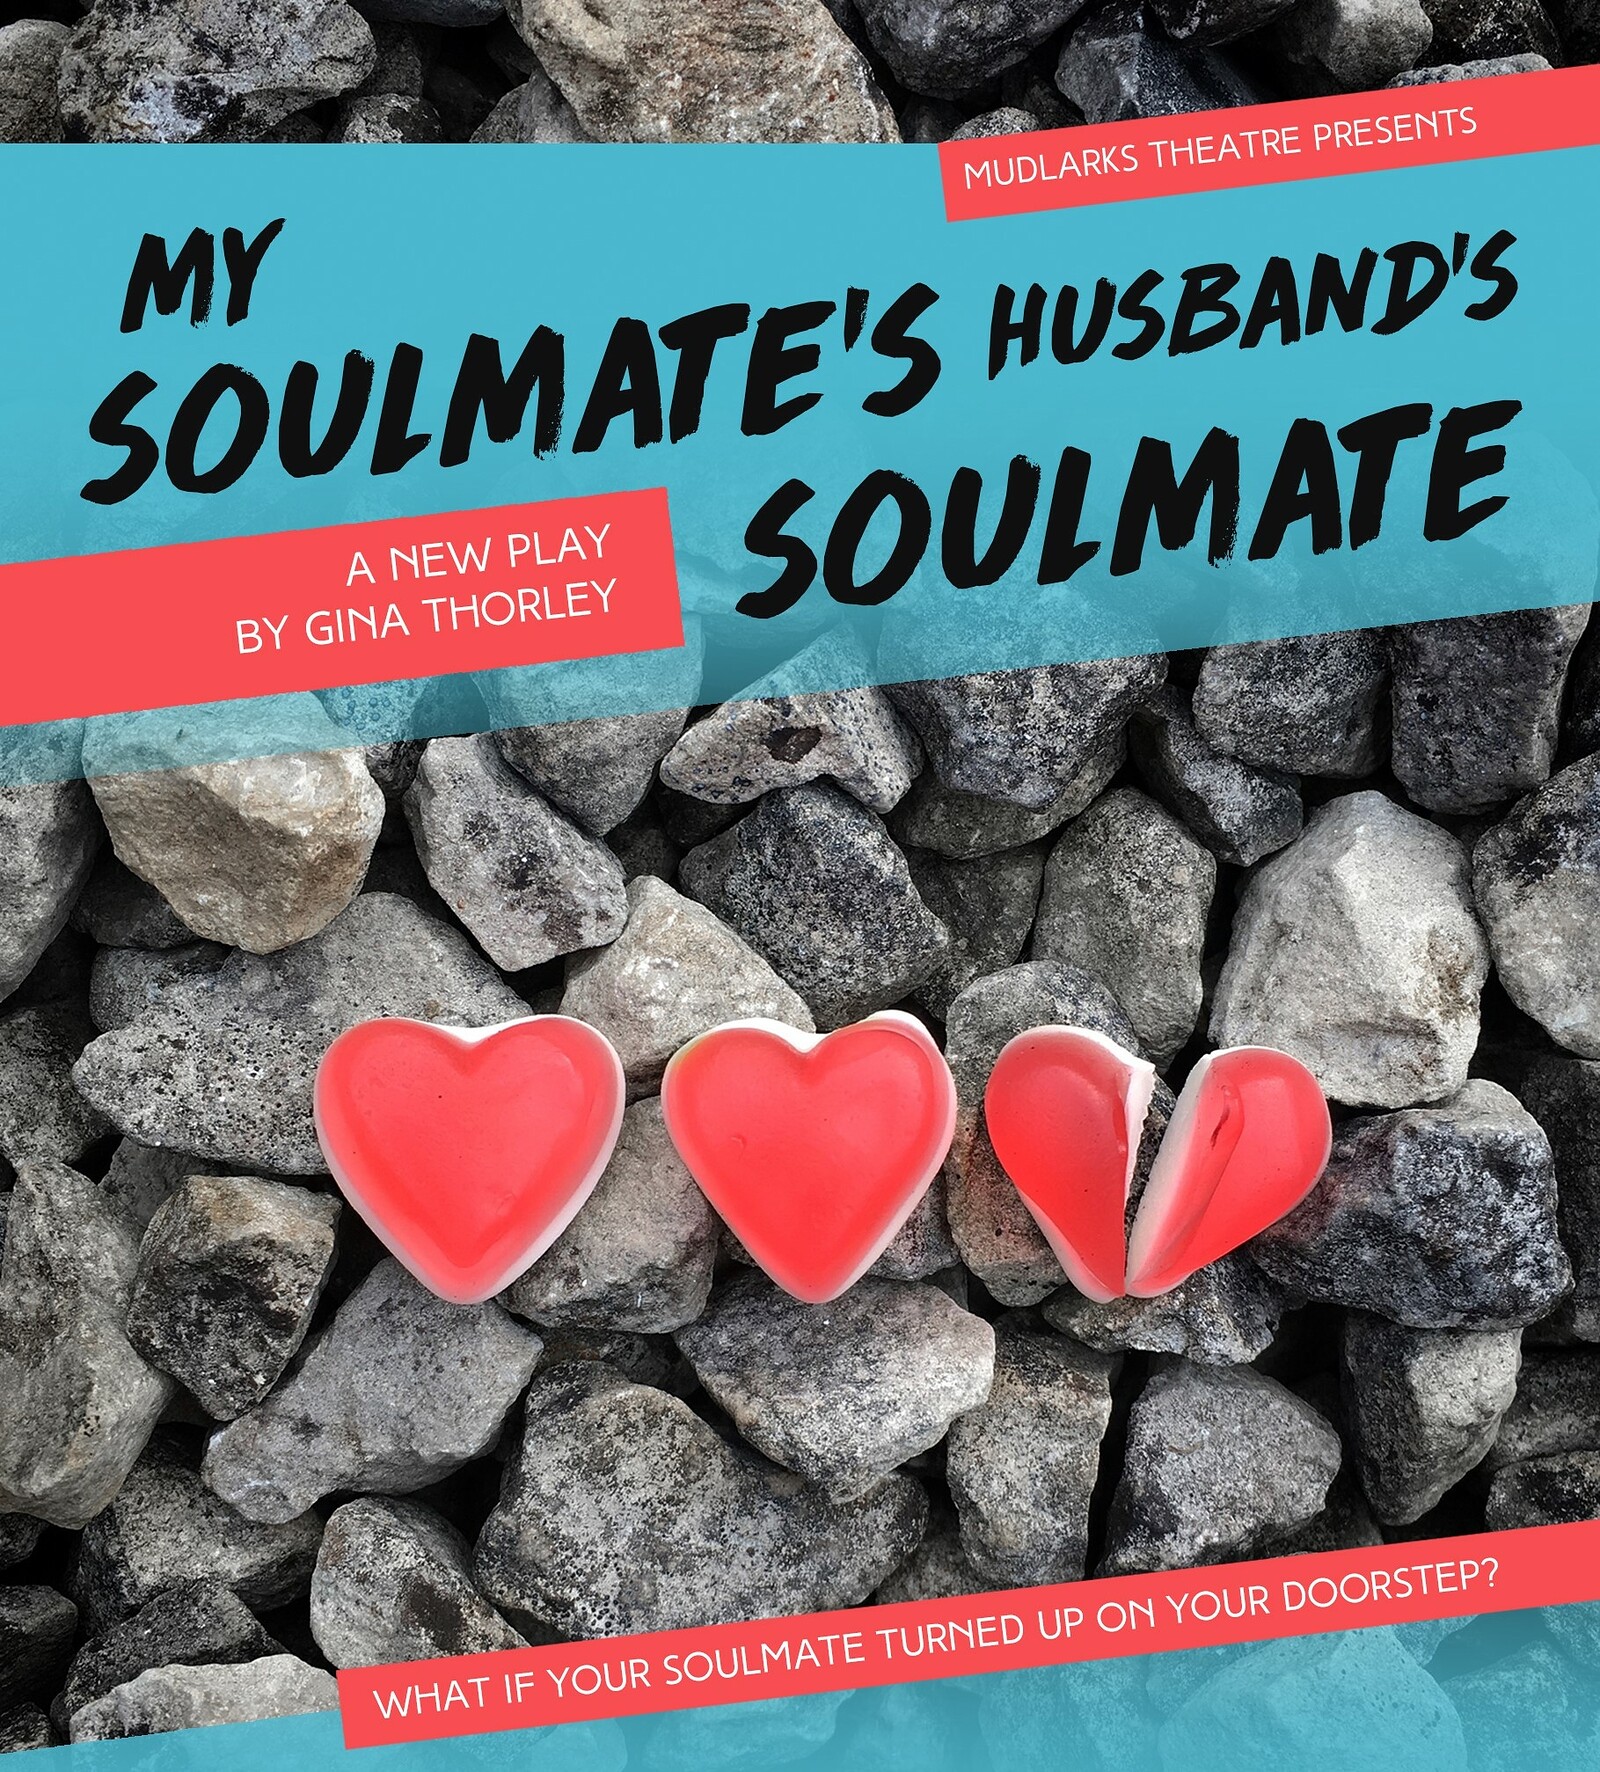 My Soulmate's Husband's Soulmate at Alma Tavern and Theatre